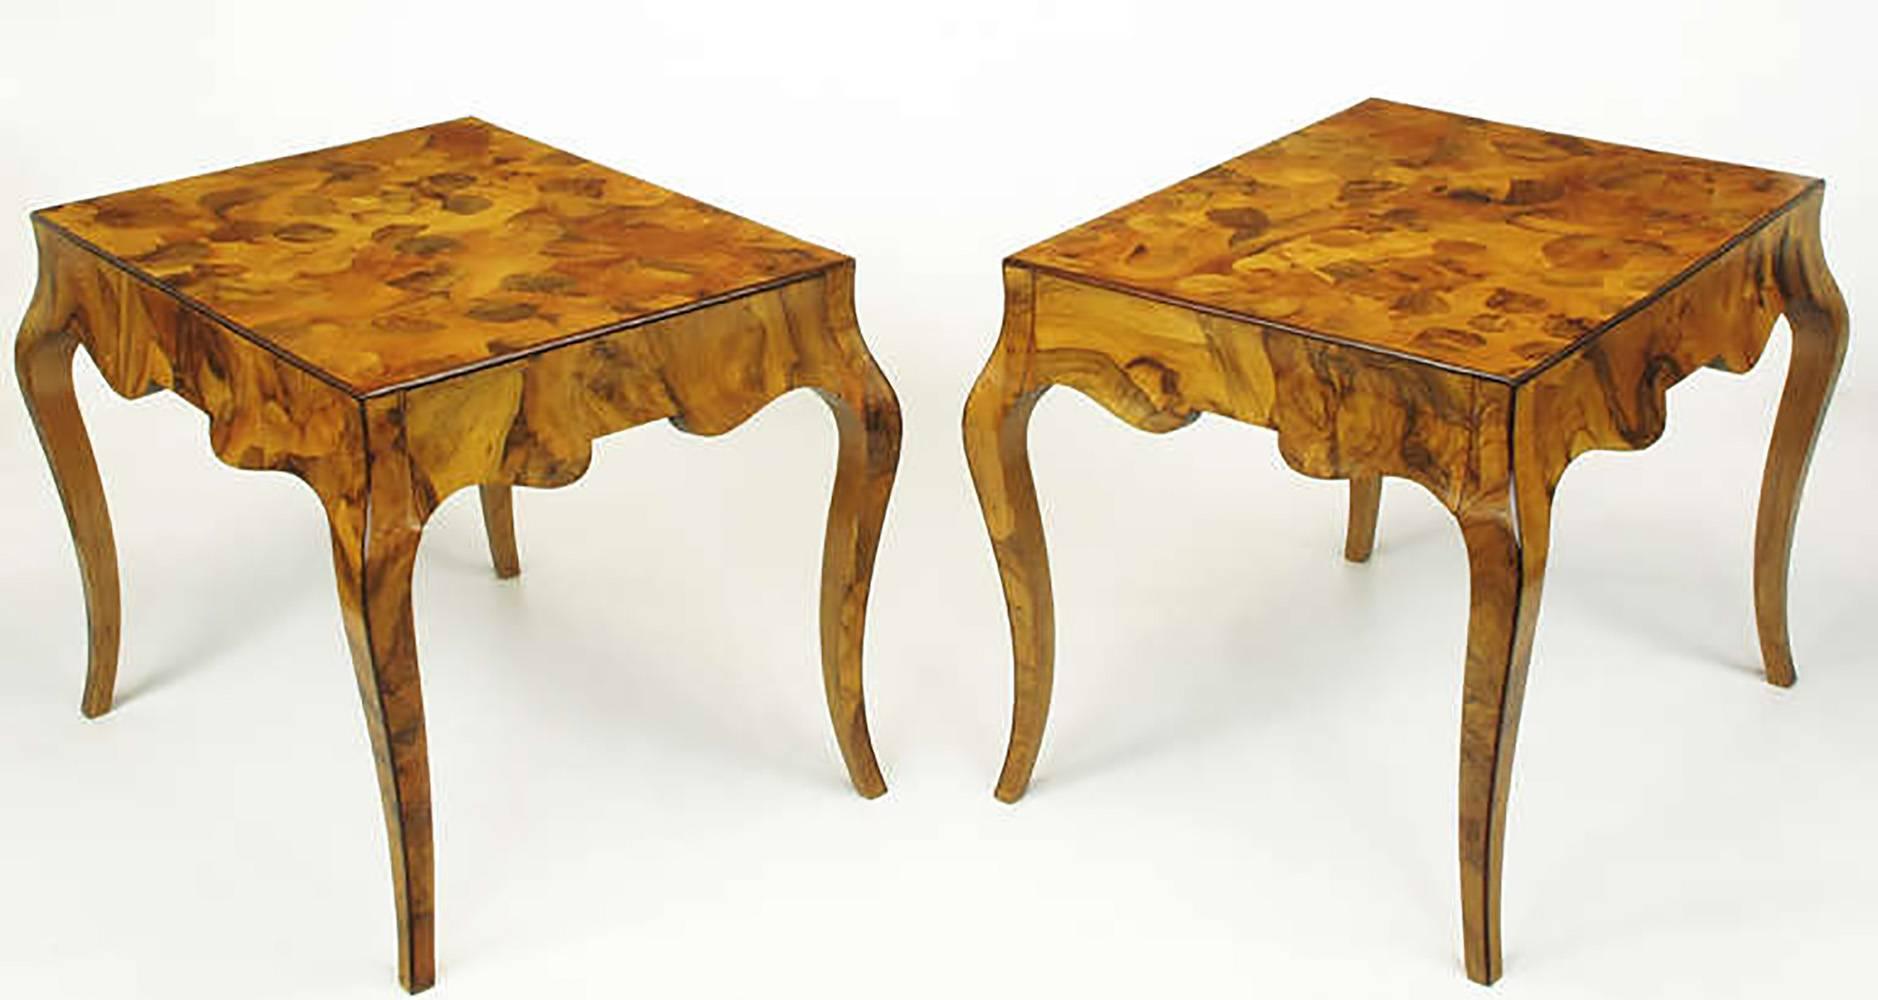 Pair of Italian oyster burl cabriole leg end tables restored to original condition. Inconspicuous single front drawer, solid stripe borders all edges. Originally sold exclusively thru Macy's New York, NY in the 1950s.